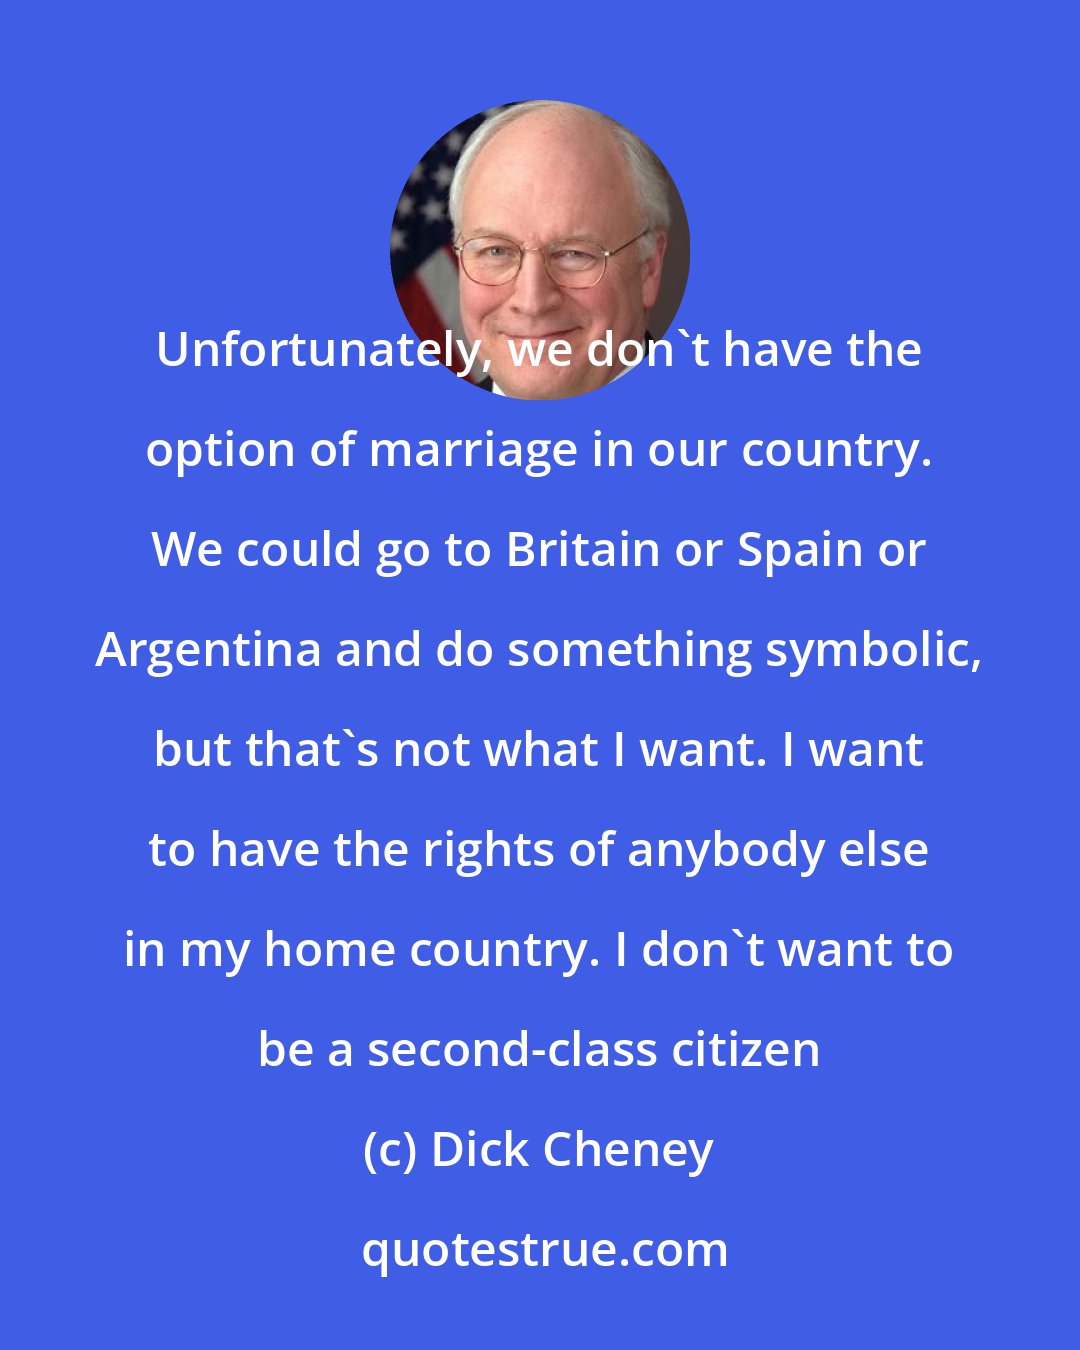 Dick Cheney: Unfortunately, we don't have the option of marriage in our country. We could go to Britain or Spain or Argentina and do something symbolic, but that's not what I want. I want to have the rights of anybody else in my home country. I don't want to be a second-class citizen